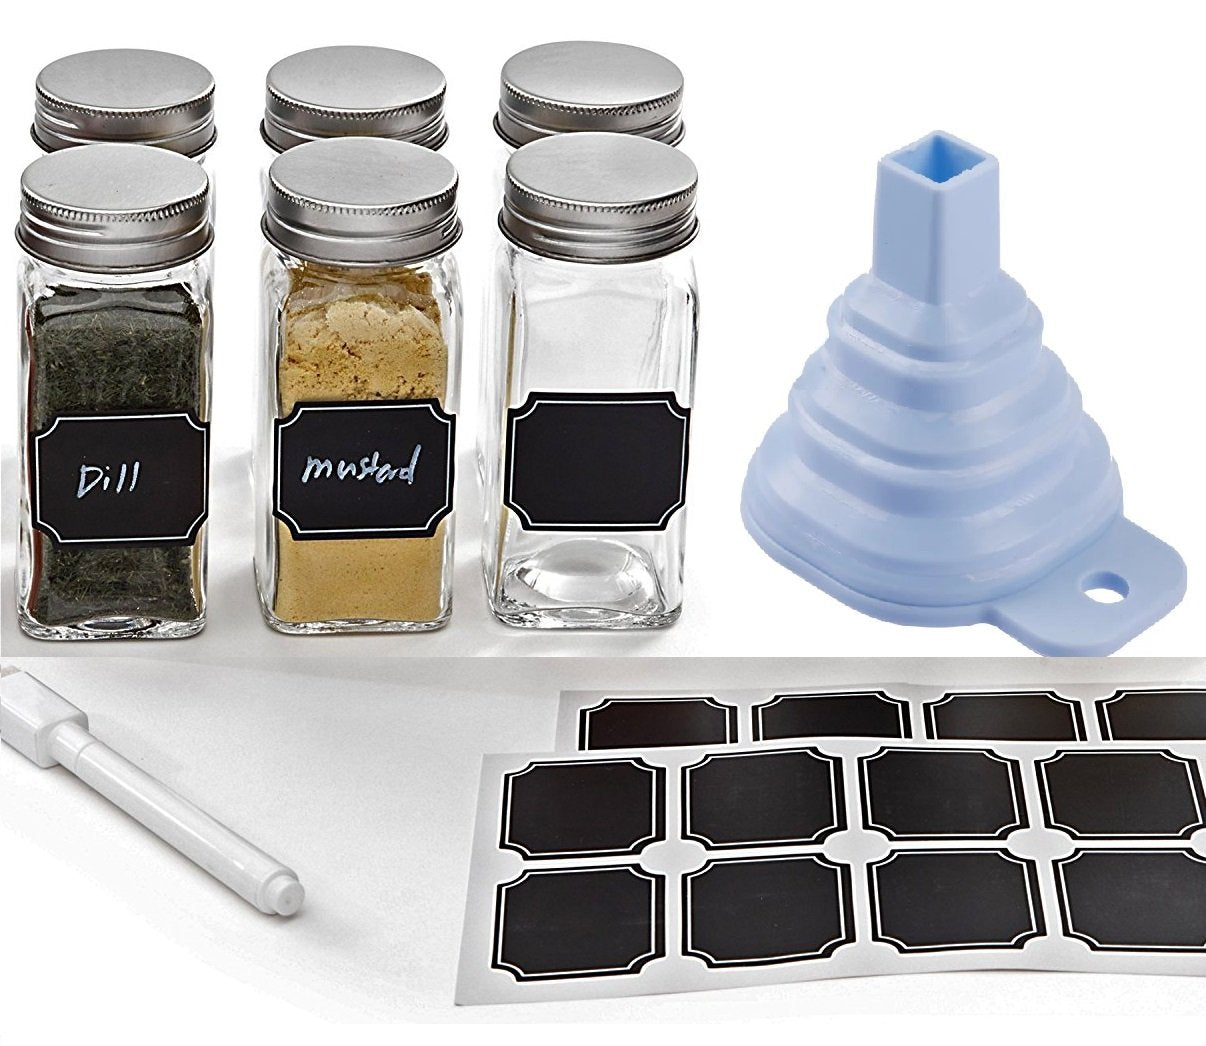 Set of 6 - Square Glass Spice Jars with Shaker Tops, Chalkboard Labels & Pen, Funnel and Airtight Silver Metal Lids, 4 Ounce Capacity, By Premium Vials (6)